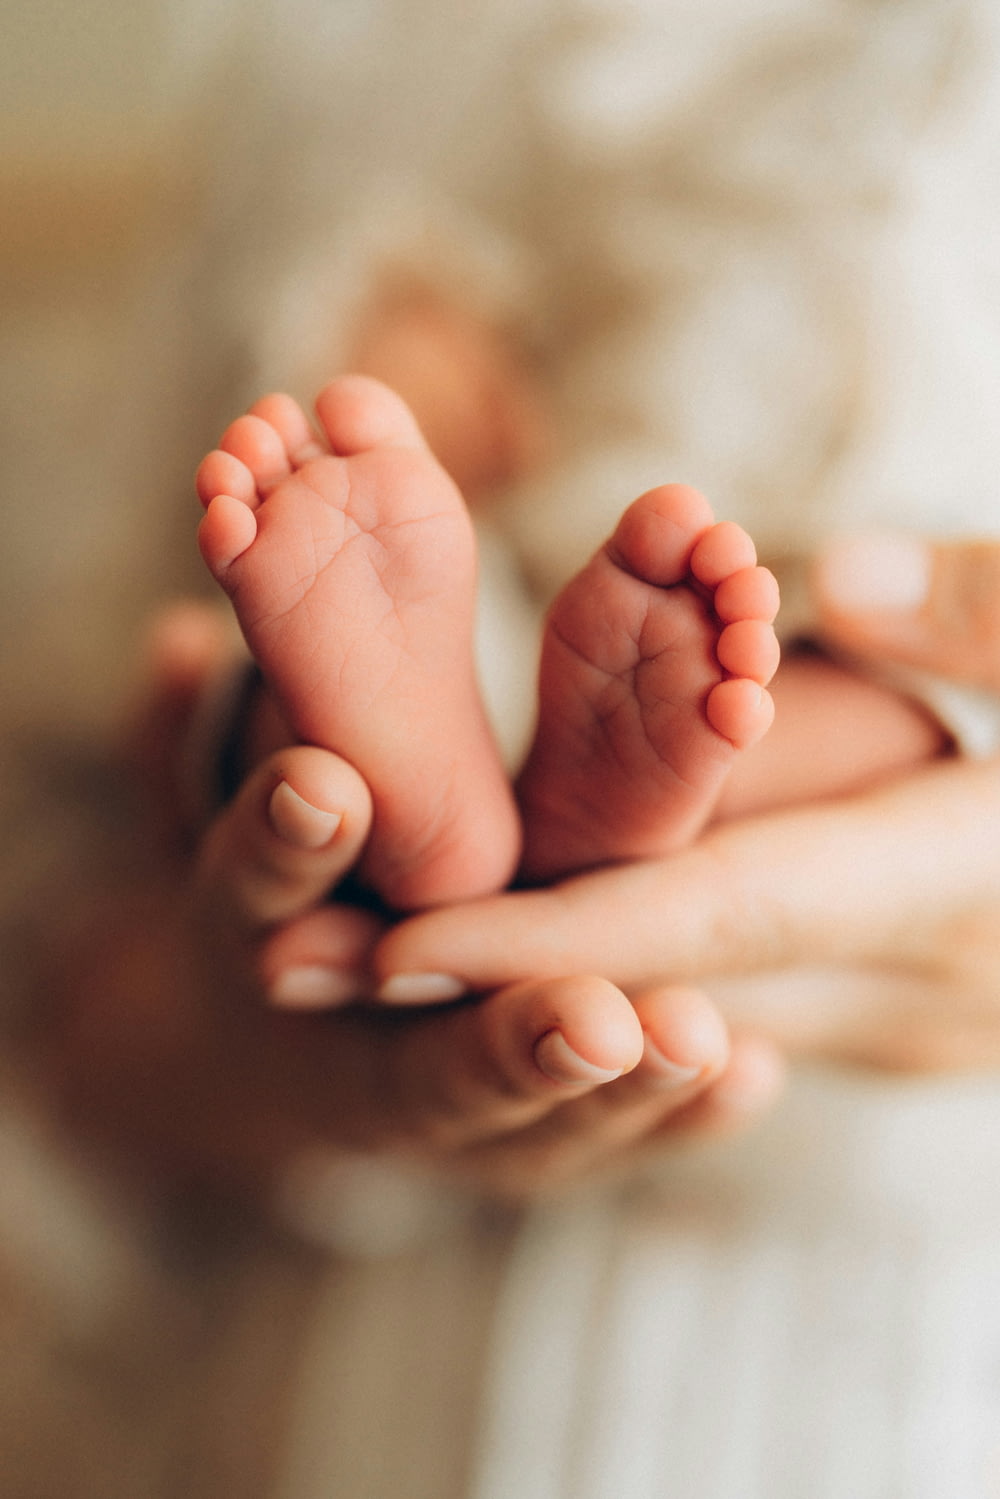 a person holding a baby's feet in their hands